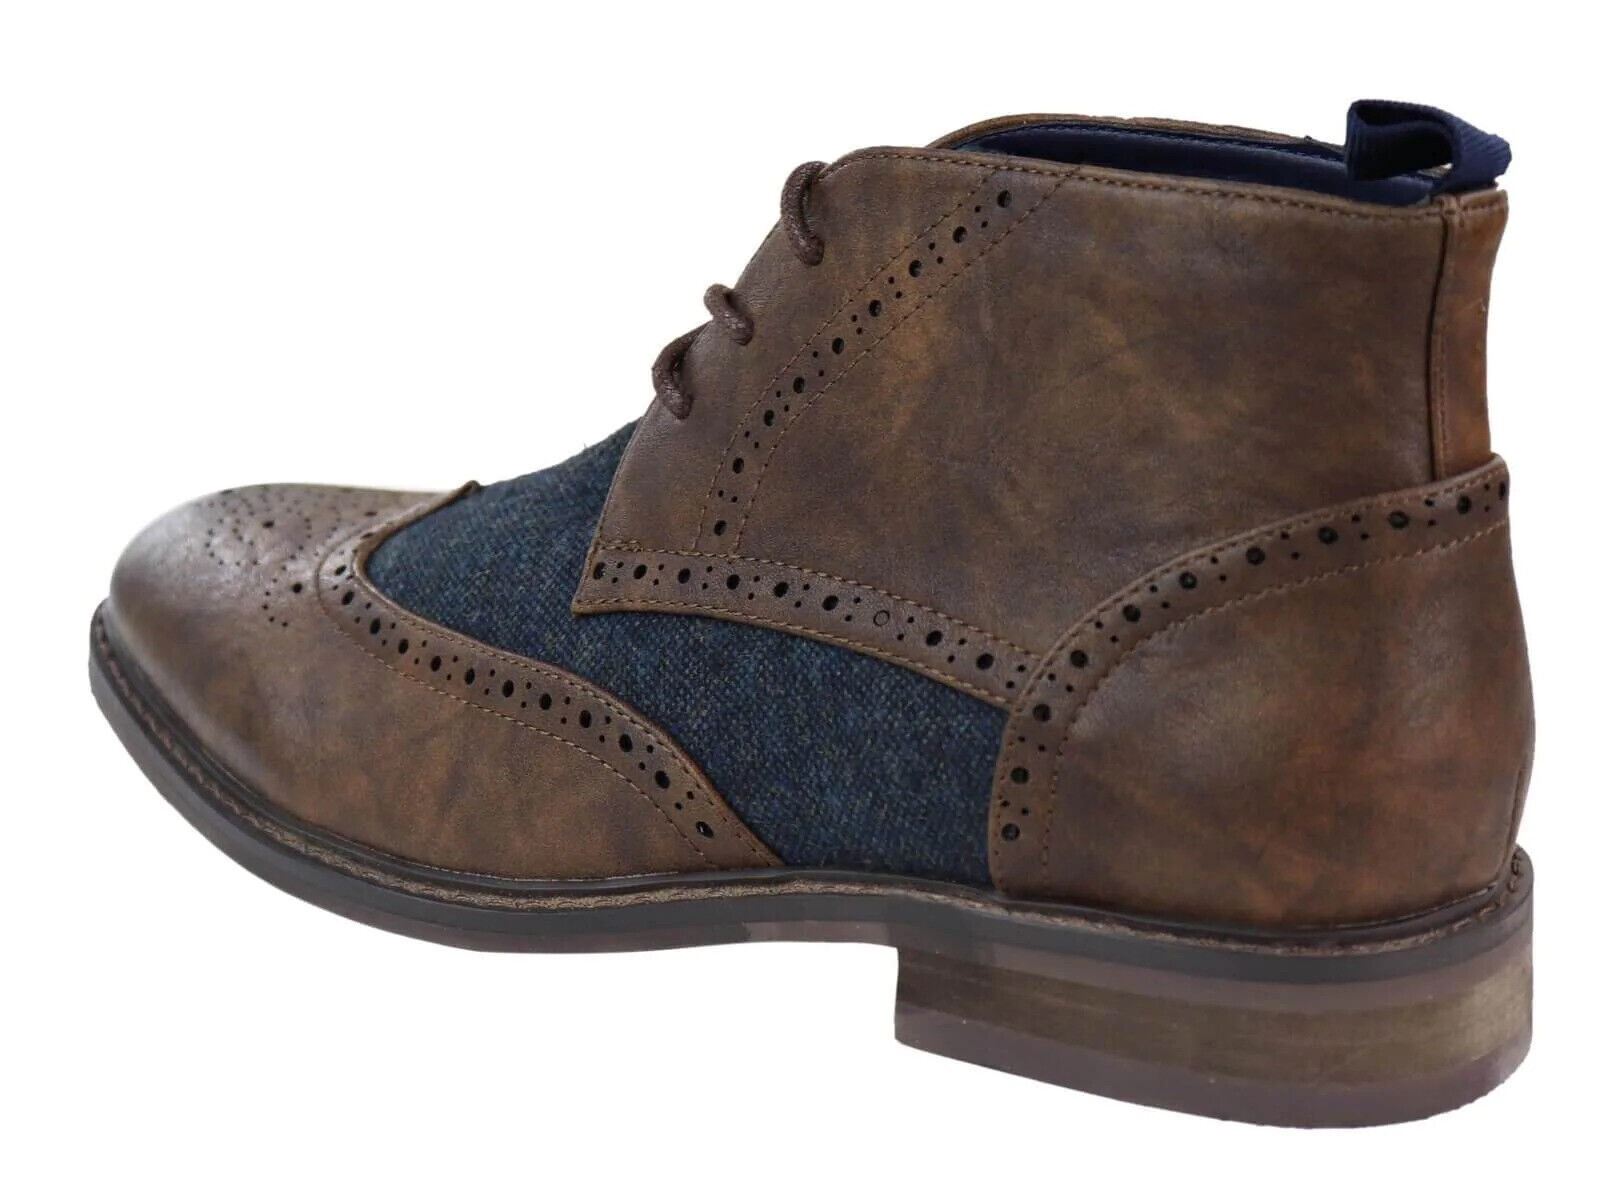 Mens Classic Tweed Oxford Brogue Ankle Boots in Brown Leather - Upperclass Fashions 